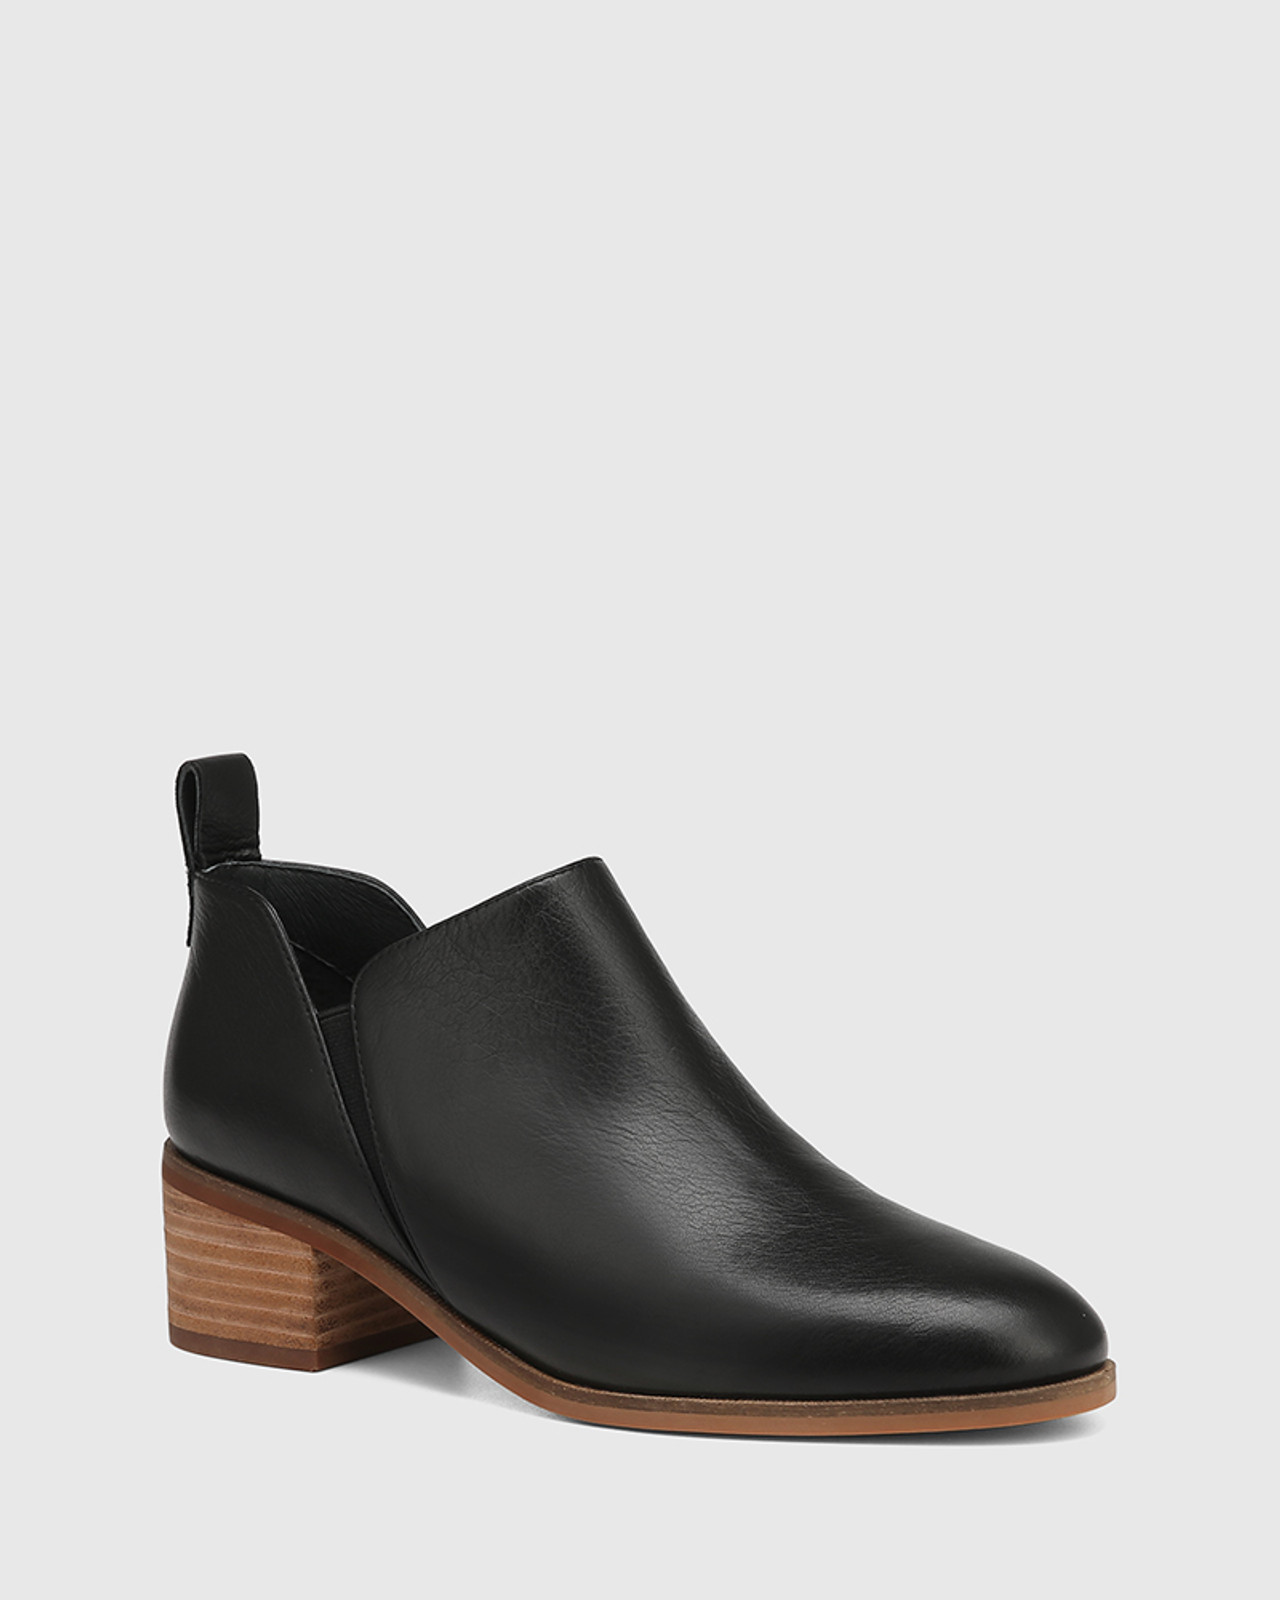 Indy Black Leather Ankle Boot